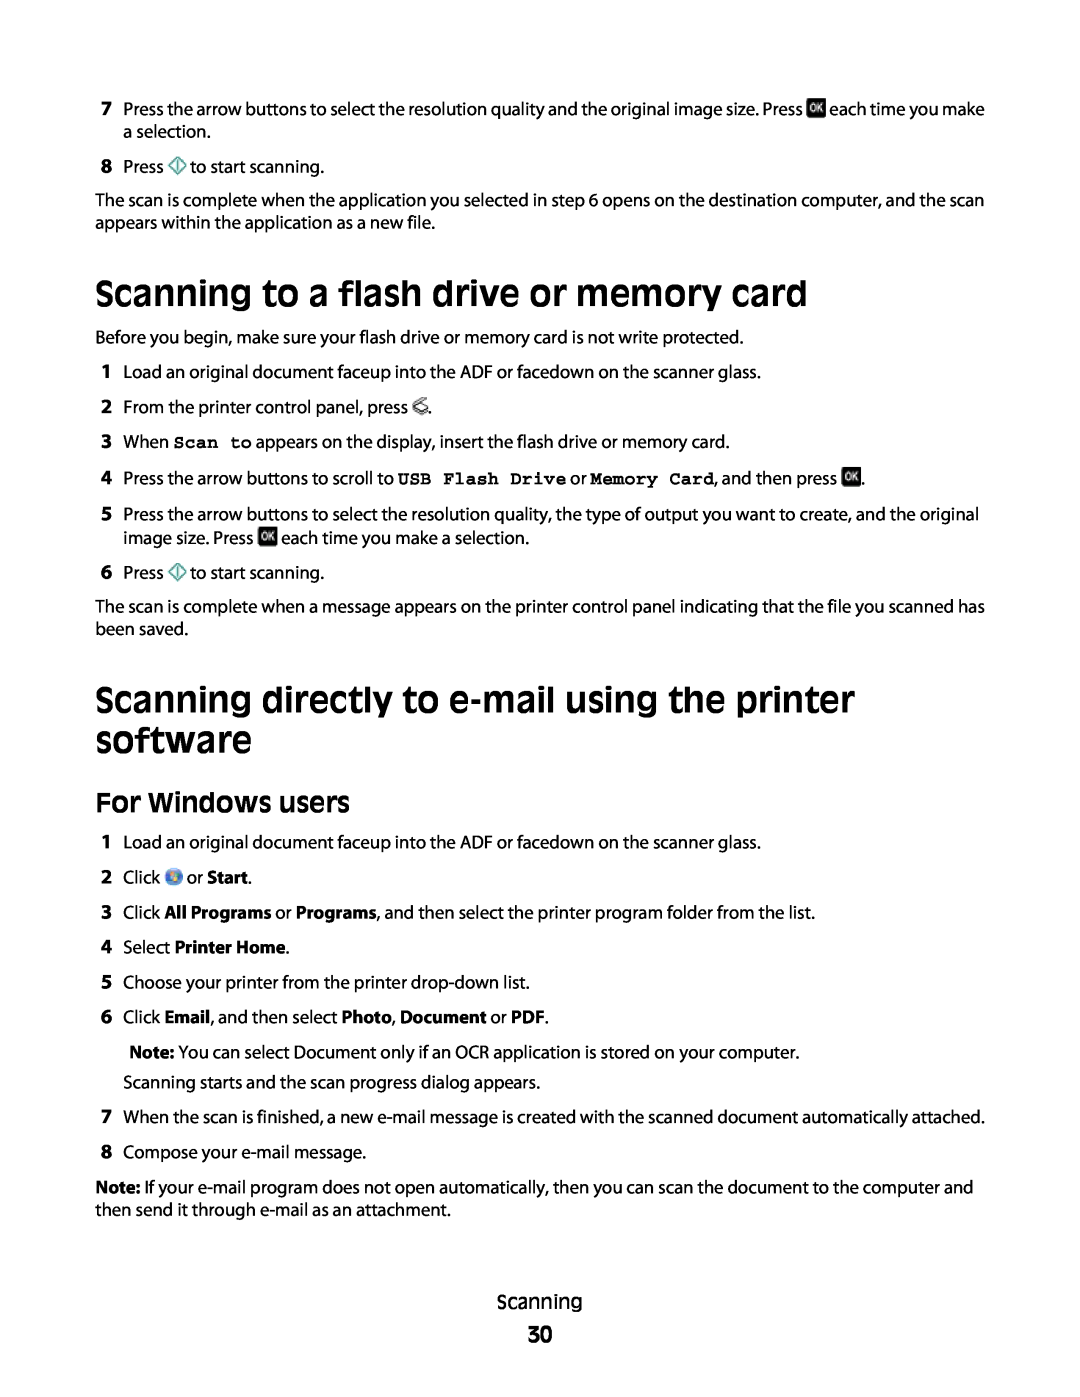 Lexmark S400 manual Scanning to a flash drive or memory card, Scanning directly to e-mail using the printer software 